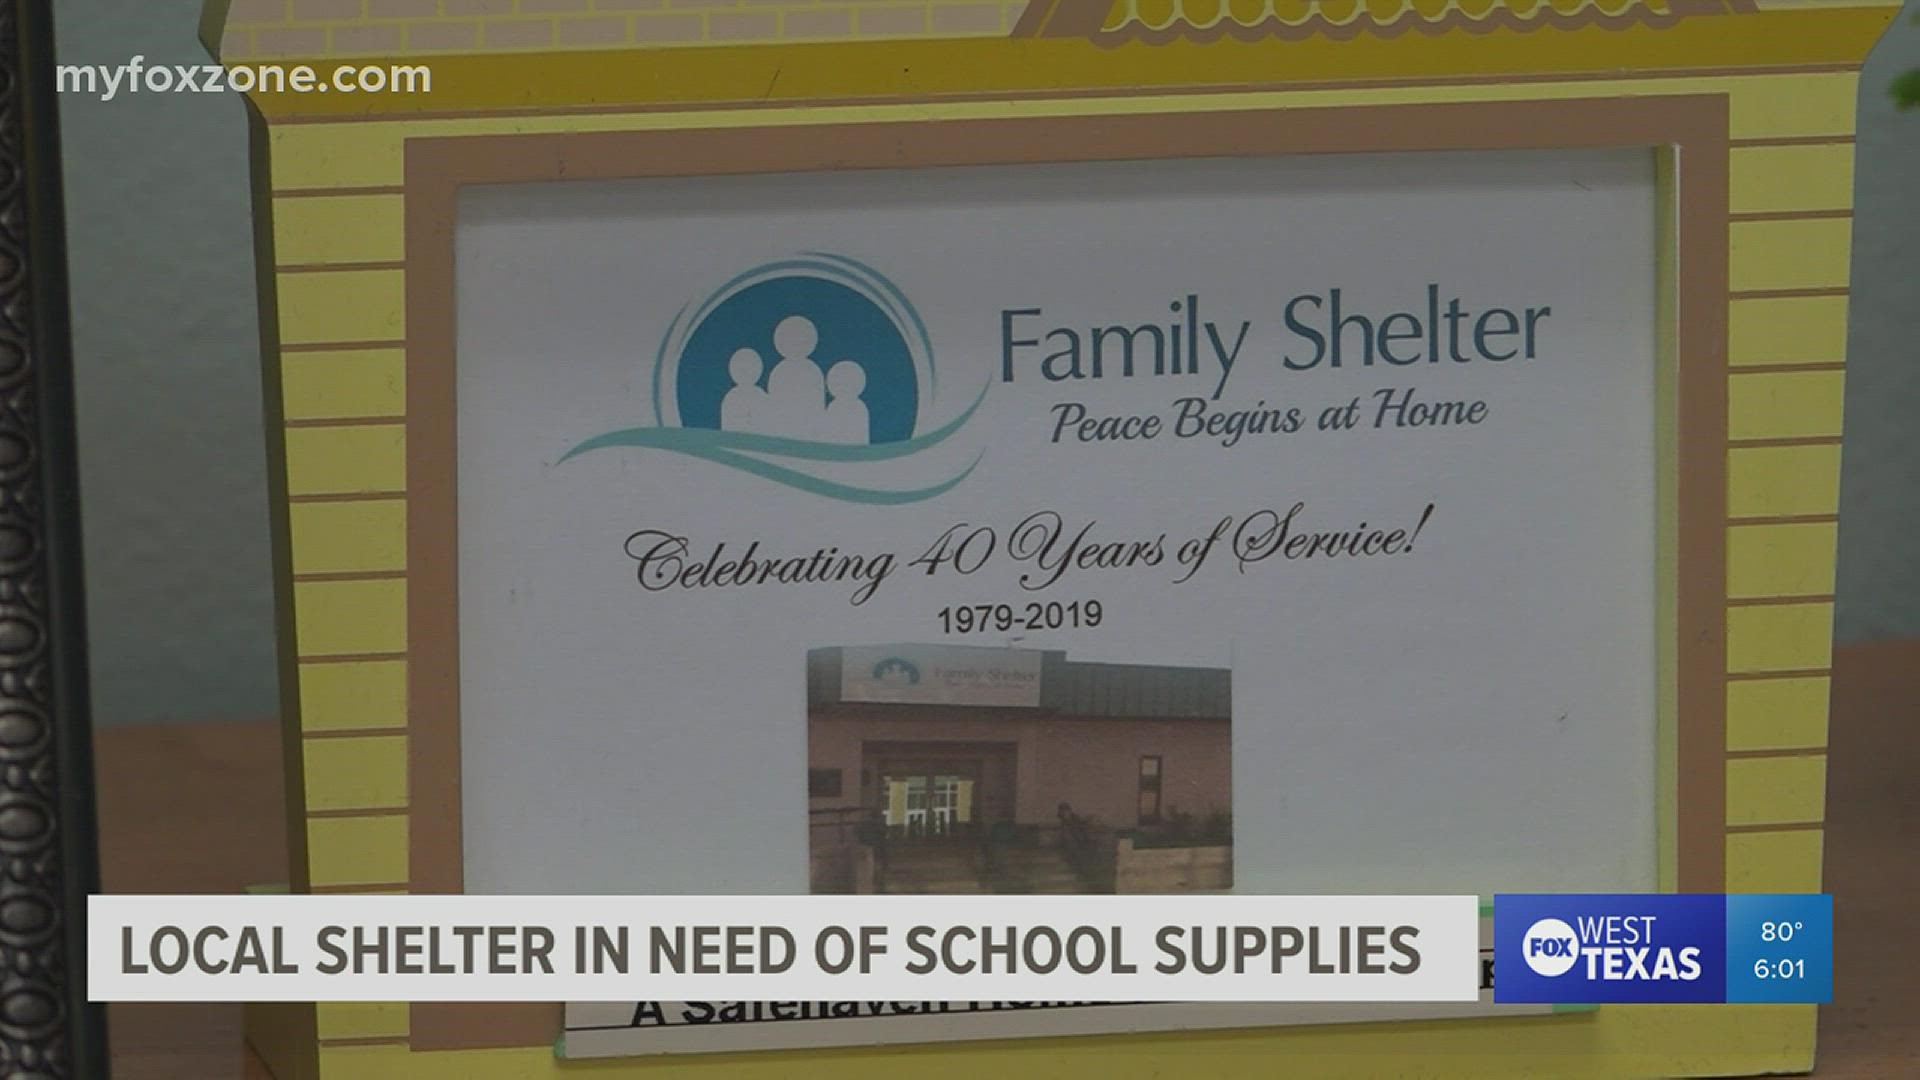 Inflation has affected how much people have donated supplies to the shelter this year.